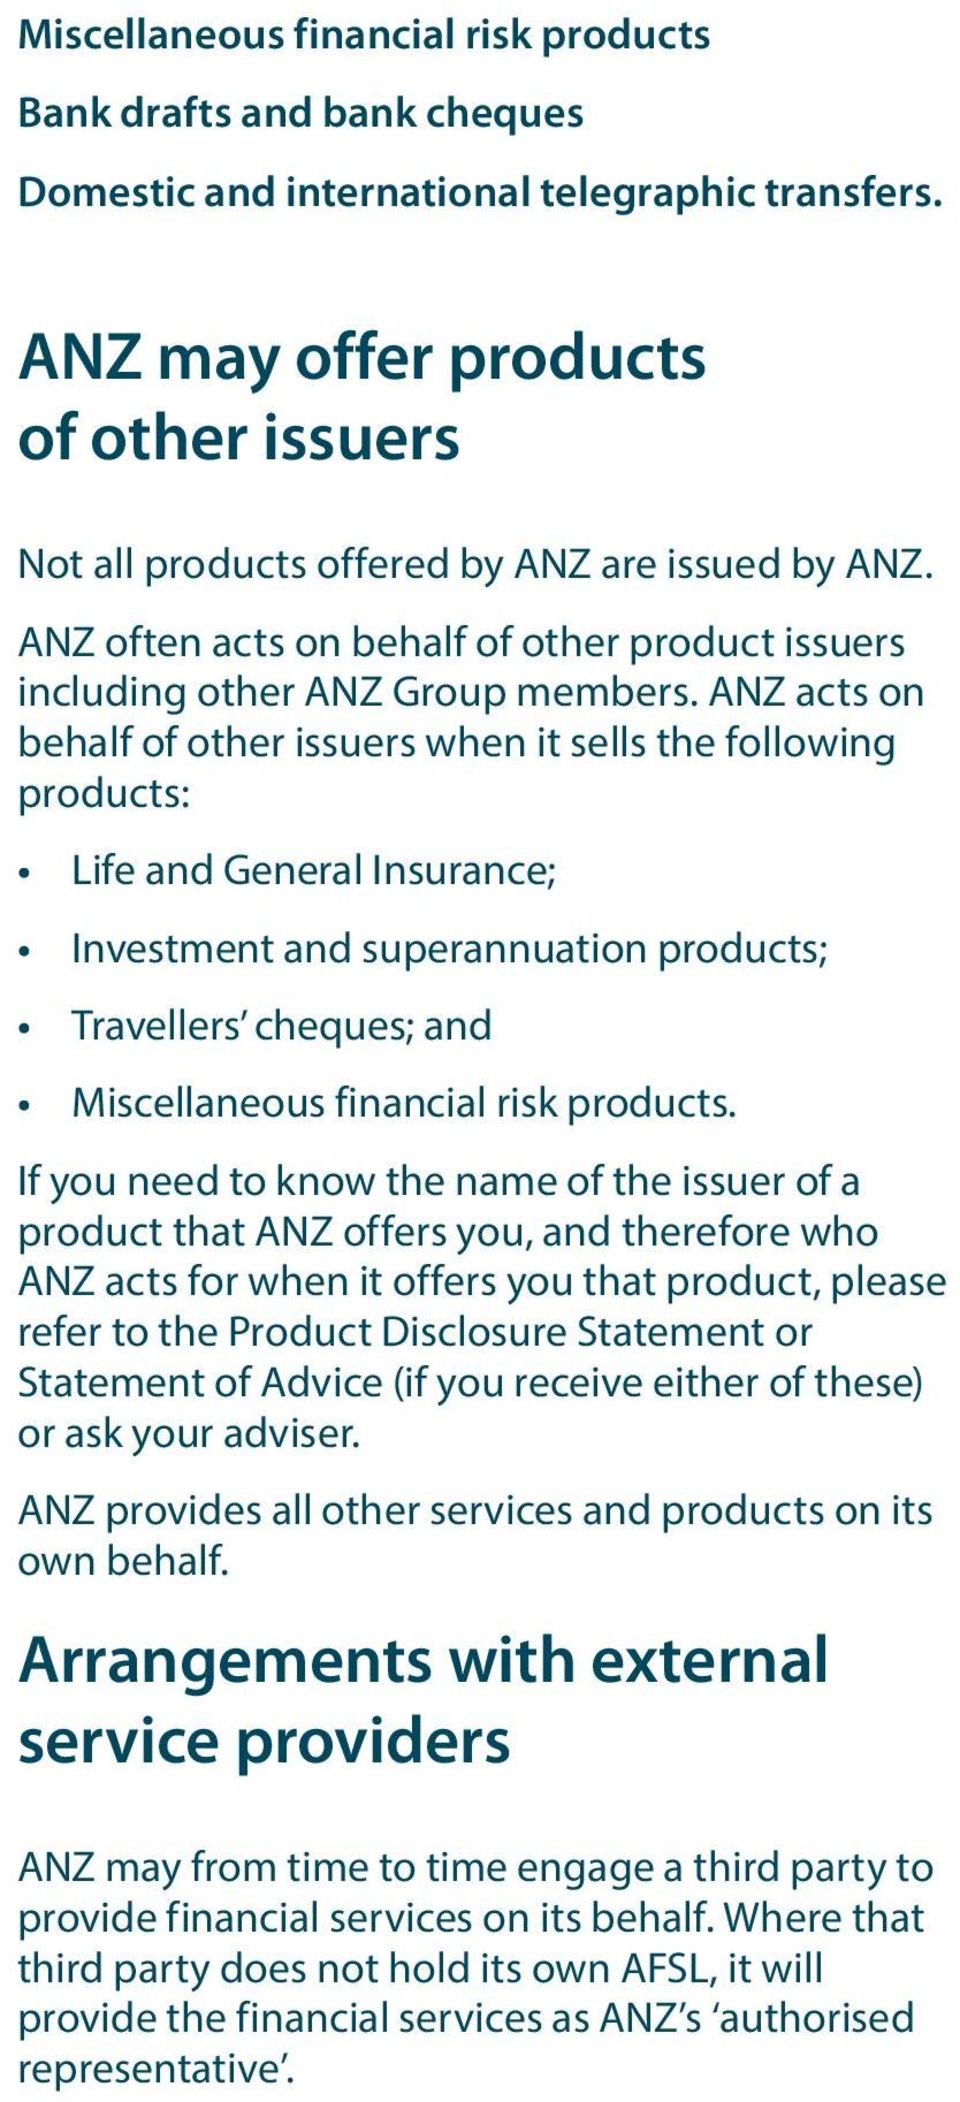 ANZ acts on behalf of other issuers when it sells the following products: Life and General Insurance; Investment and superannuation products; Travellers cheques; and Miscellaneous financial risk